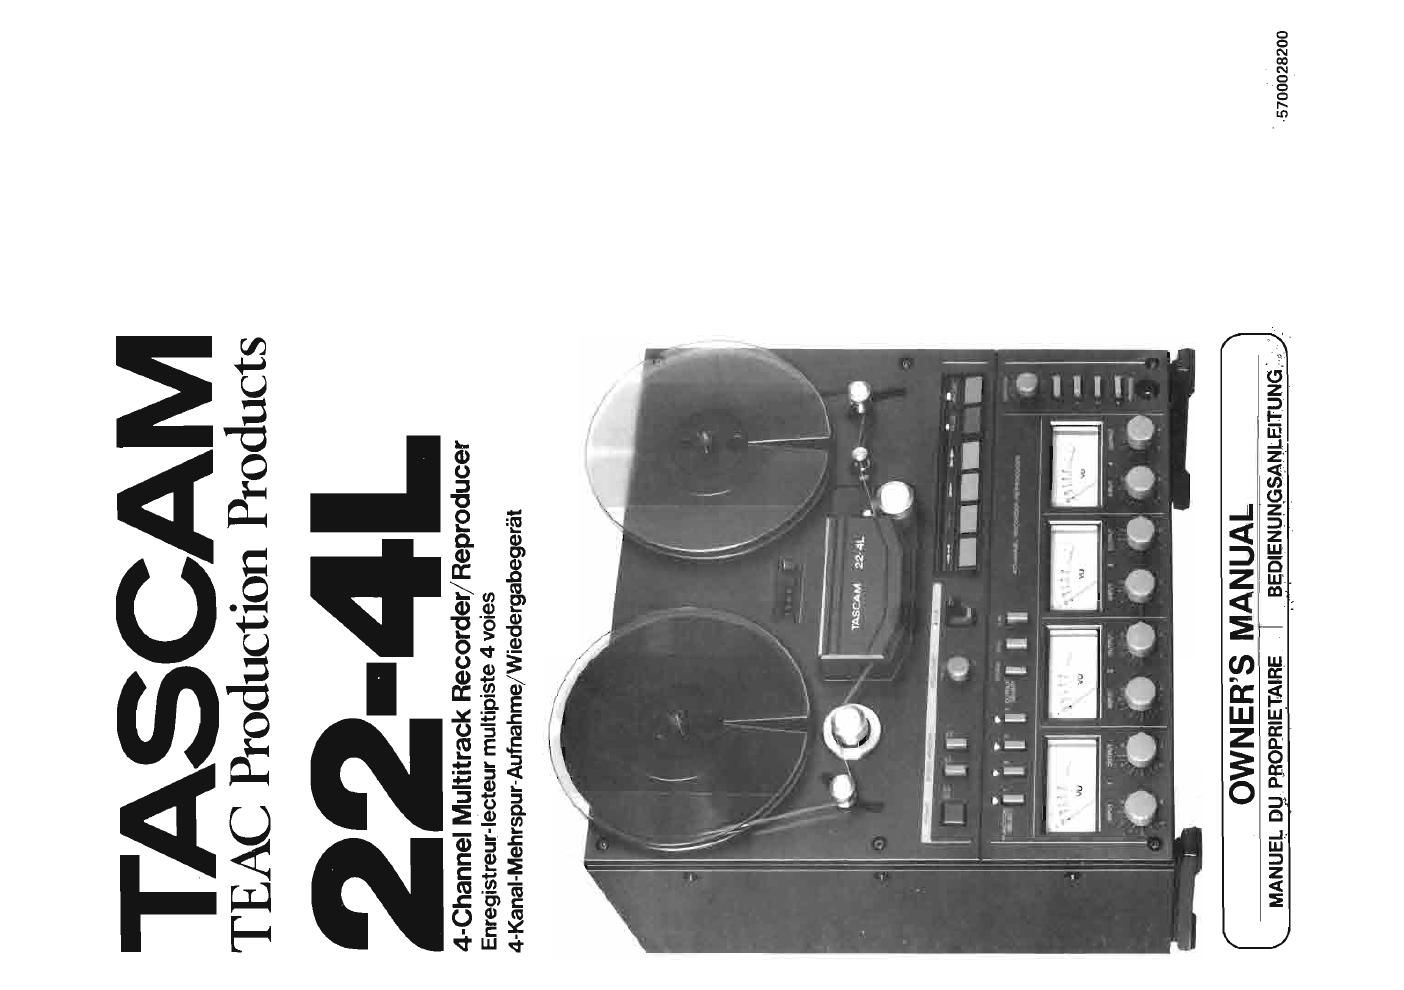 Tascam 22 4L Owners Manual